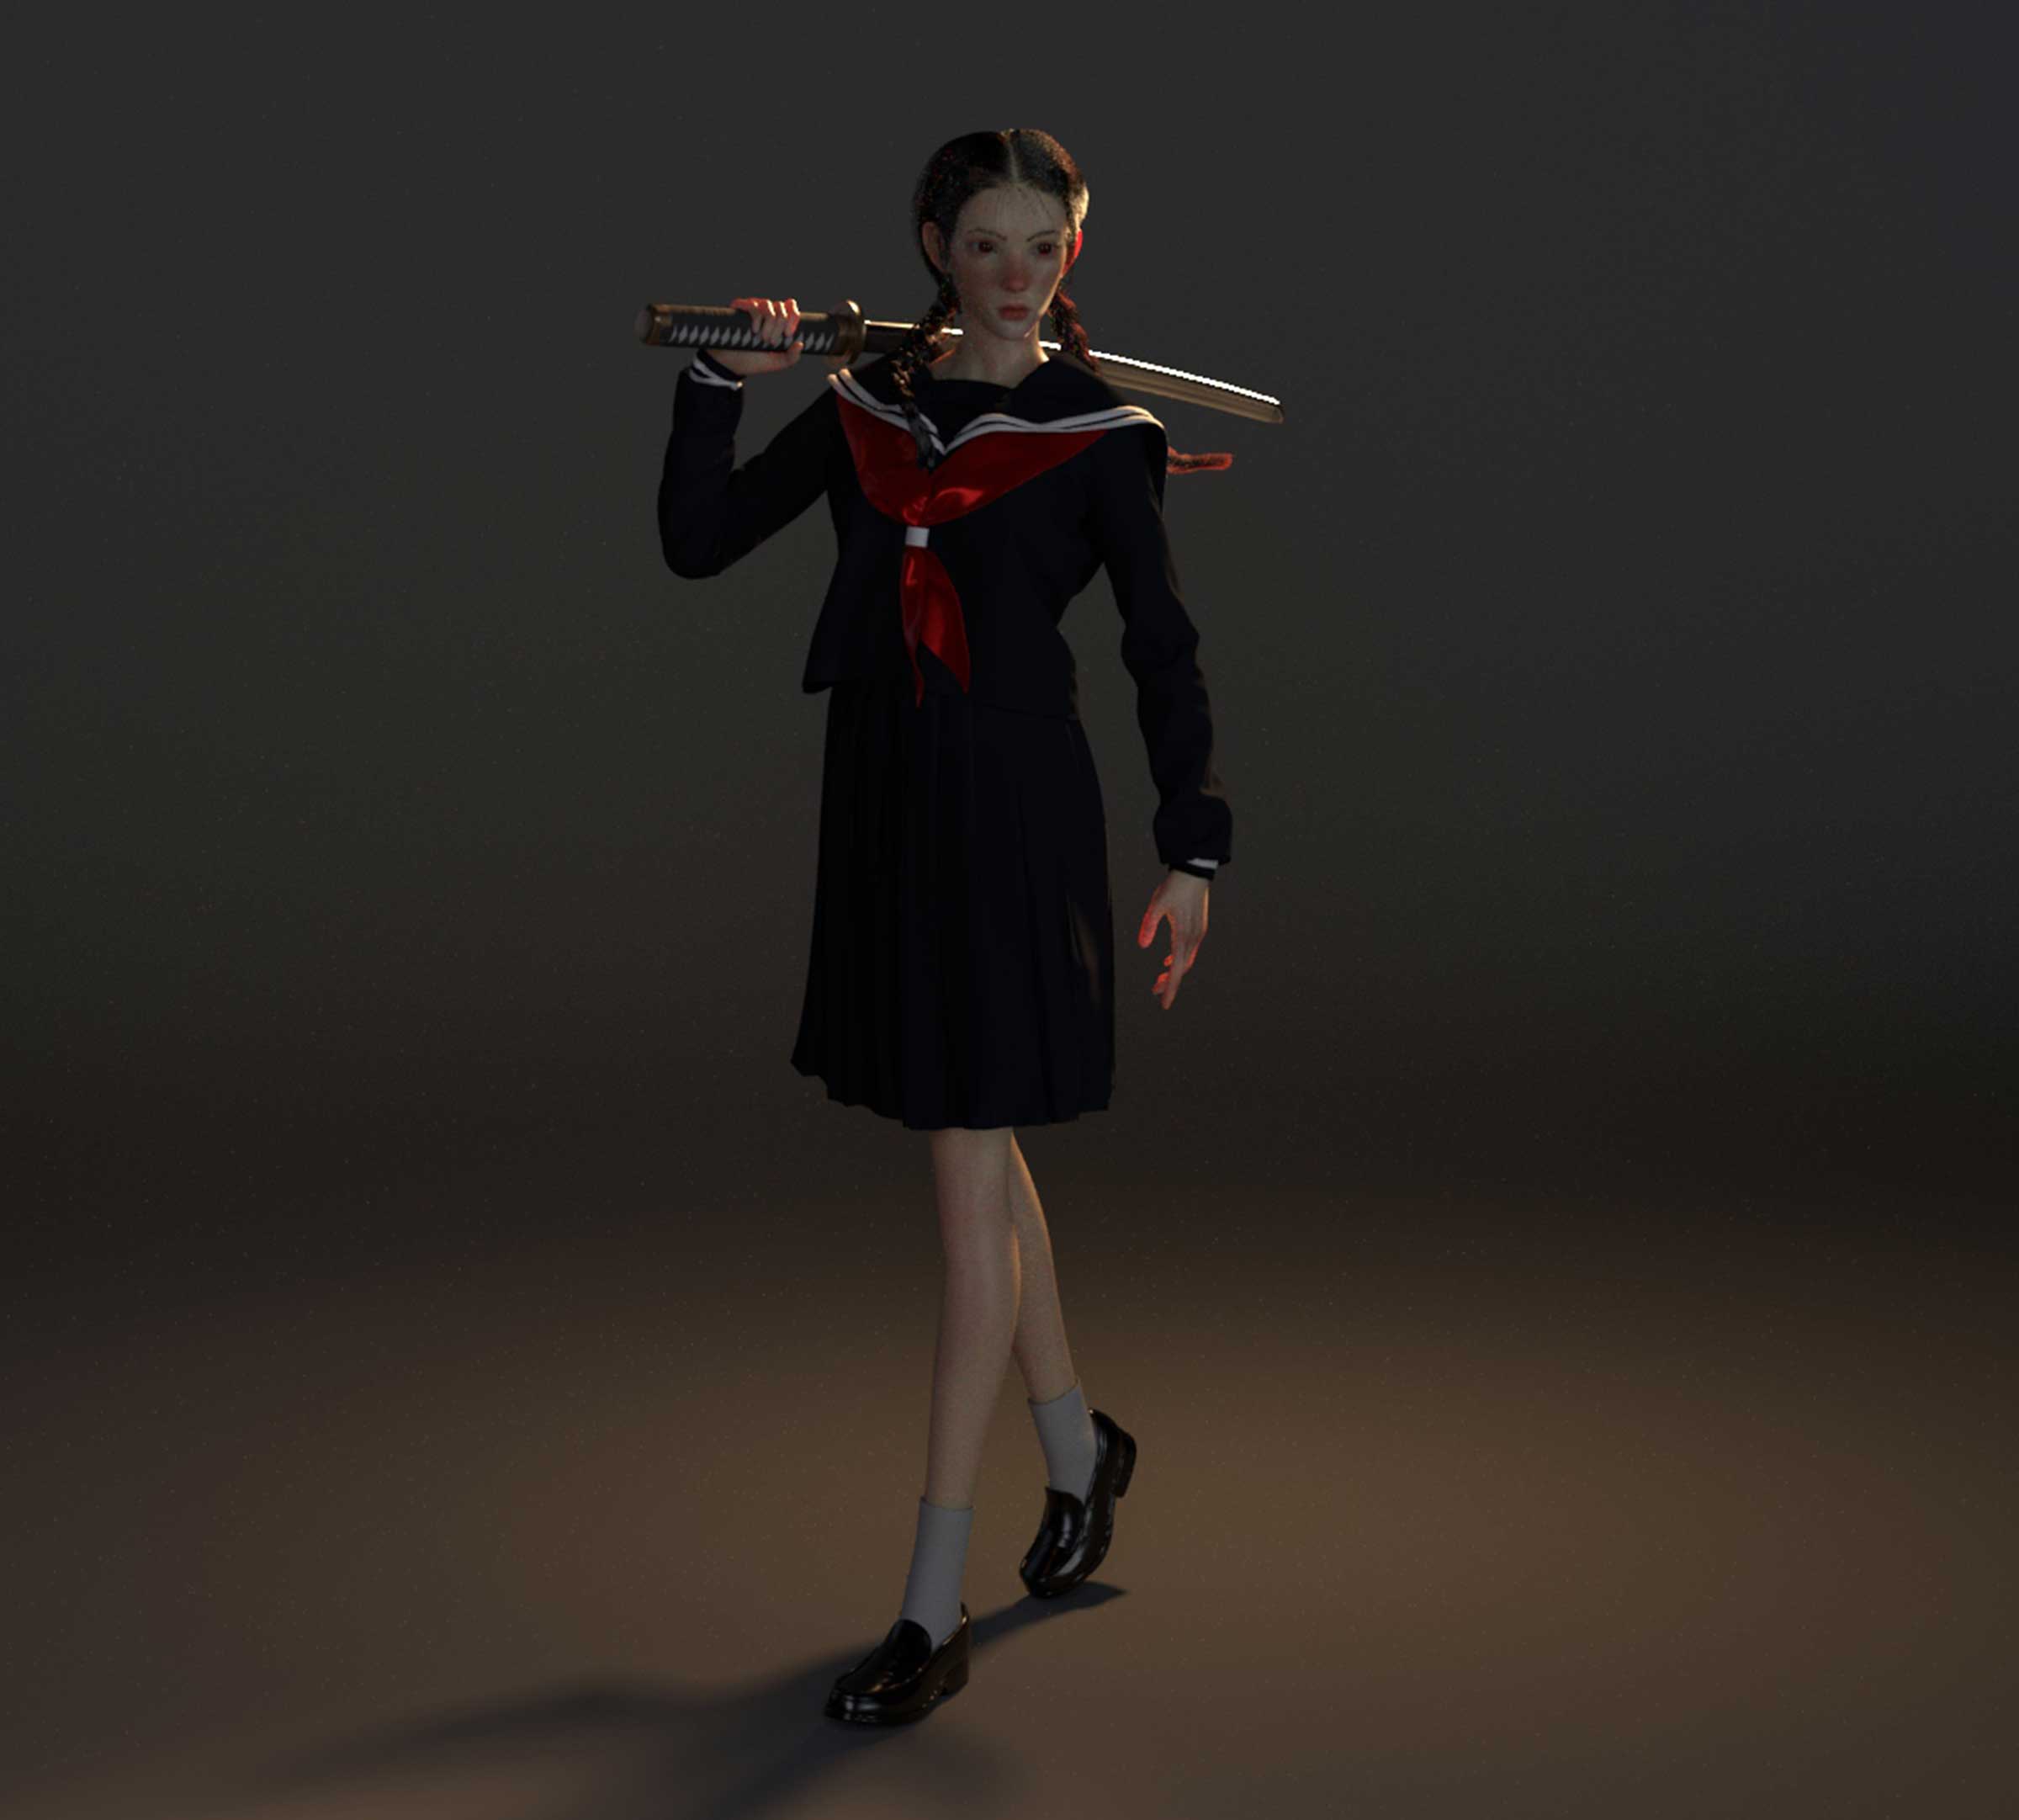 A detailed look at a girl in a uniform holding a katana.